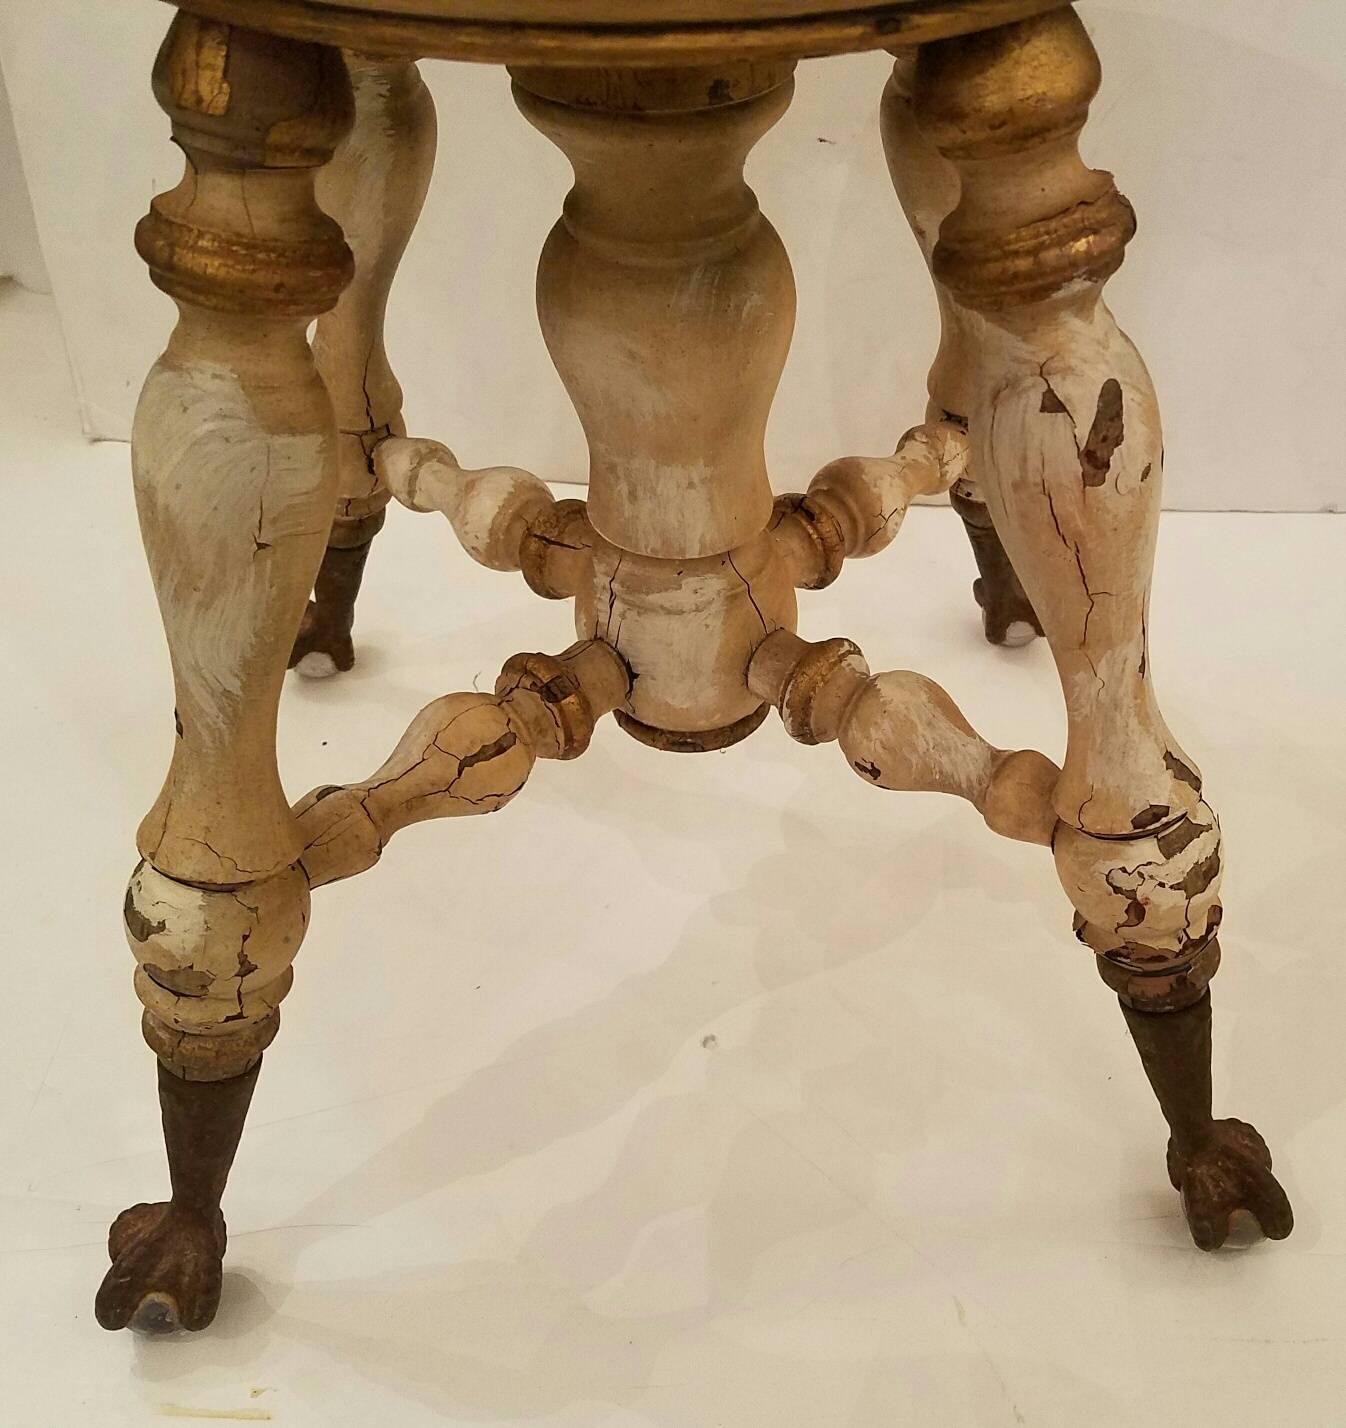 Late Victorian era revolving top piano stool with iron paw and glass ball feet.

Measures: Height 18.25